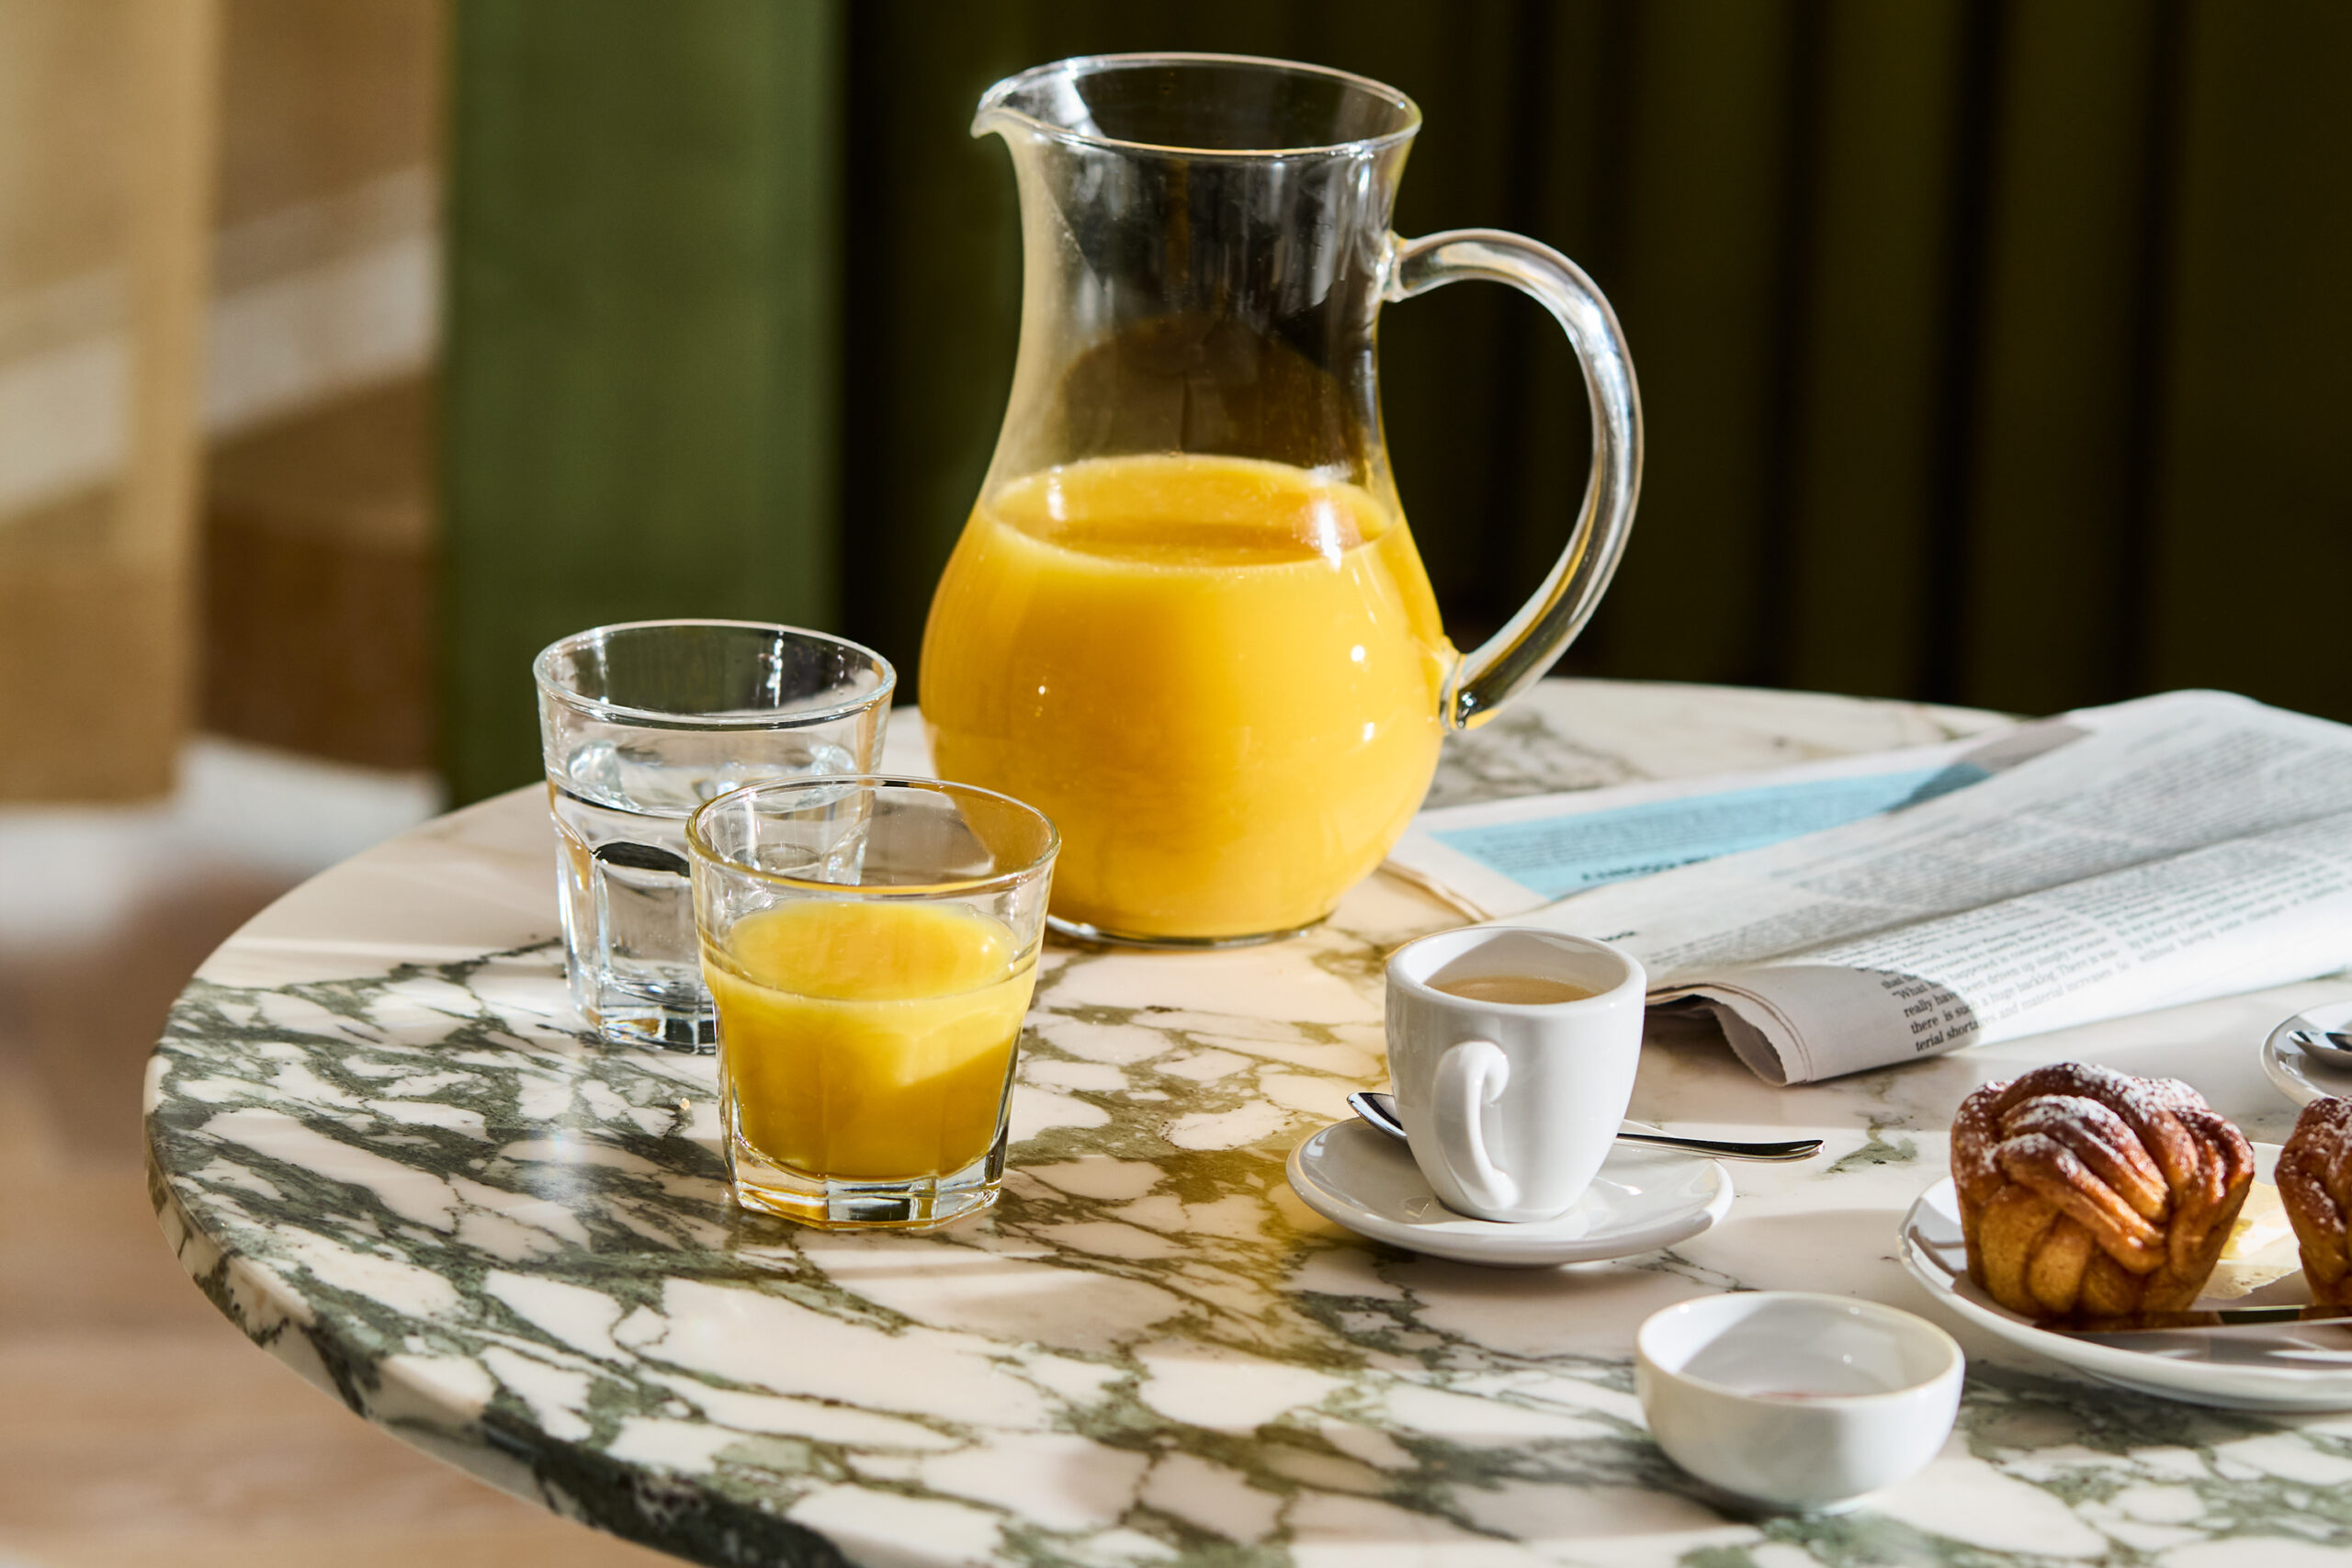 Jug of orange juice with a glass half full of orange juice and two muffins on a side table